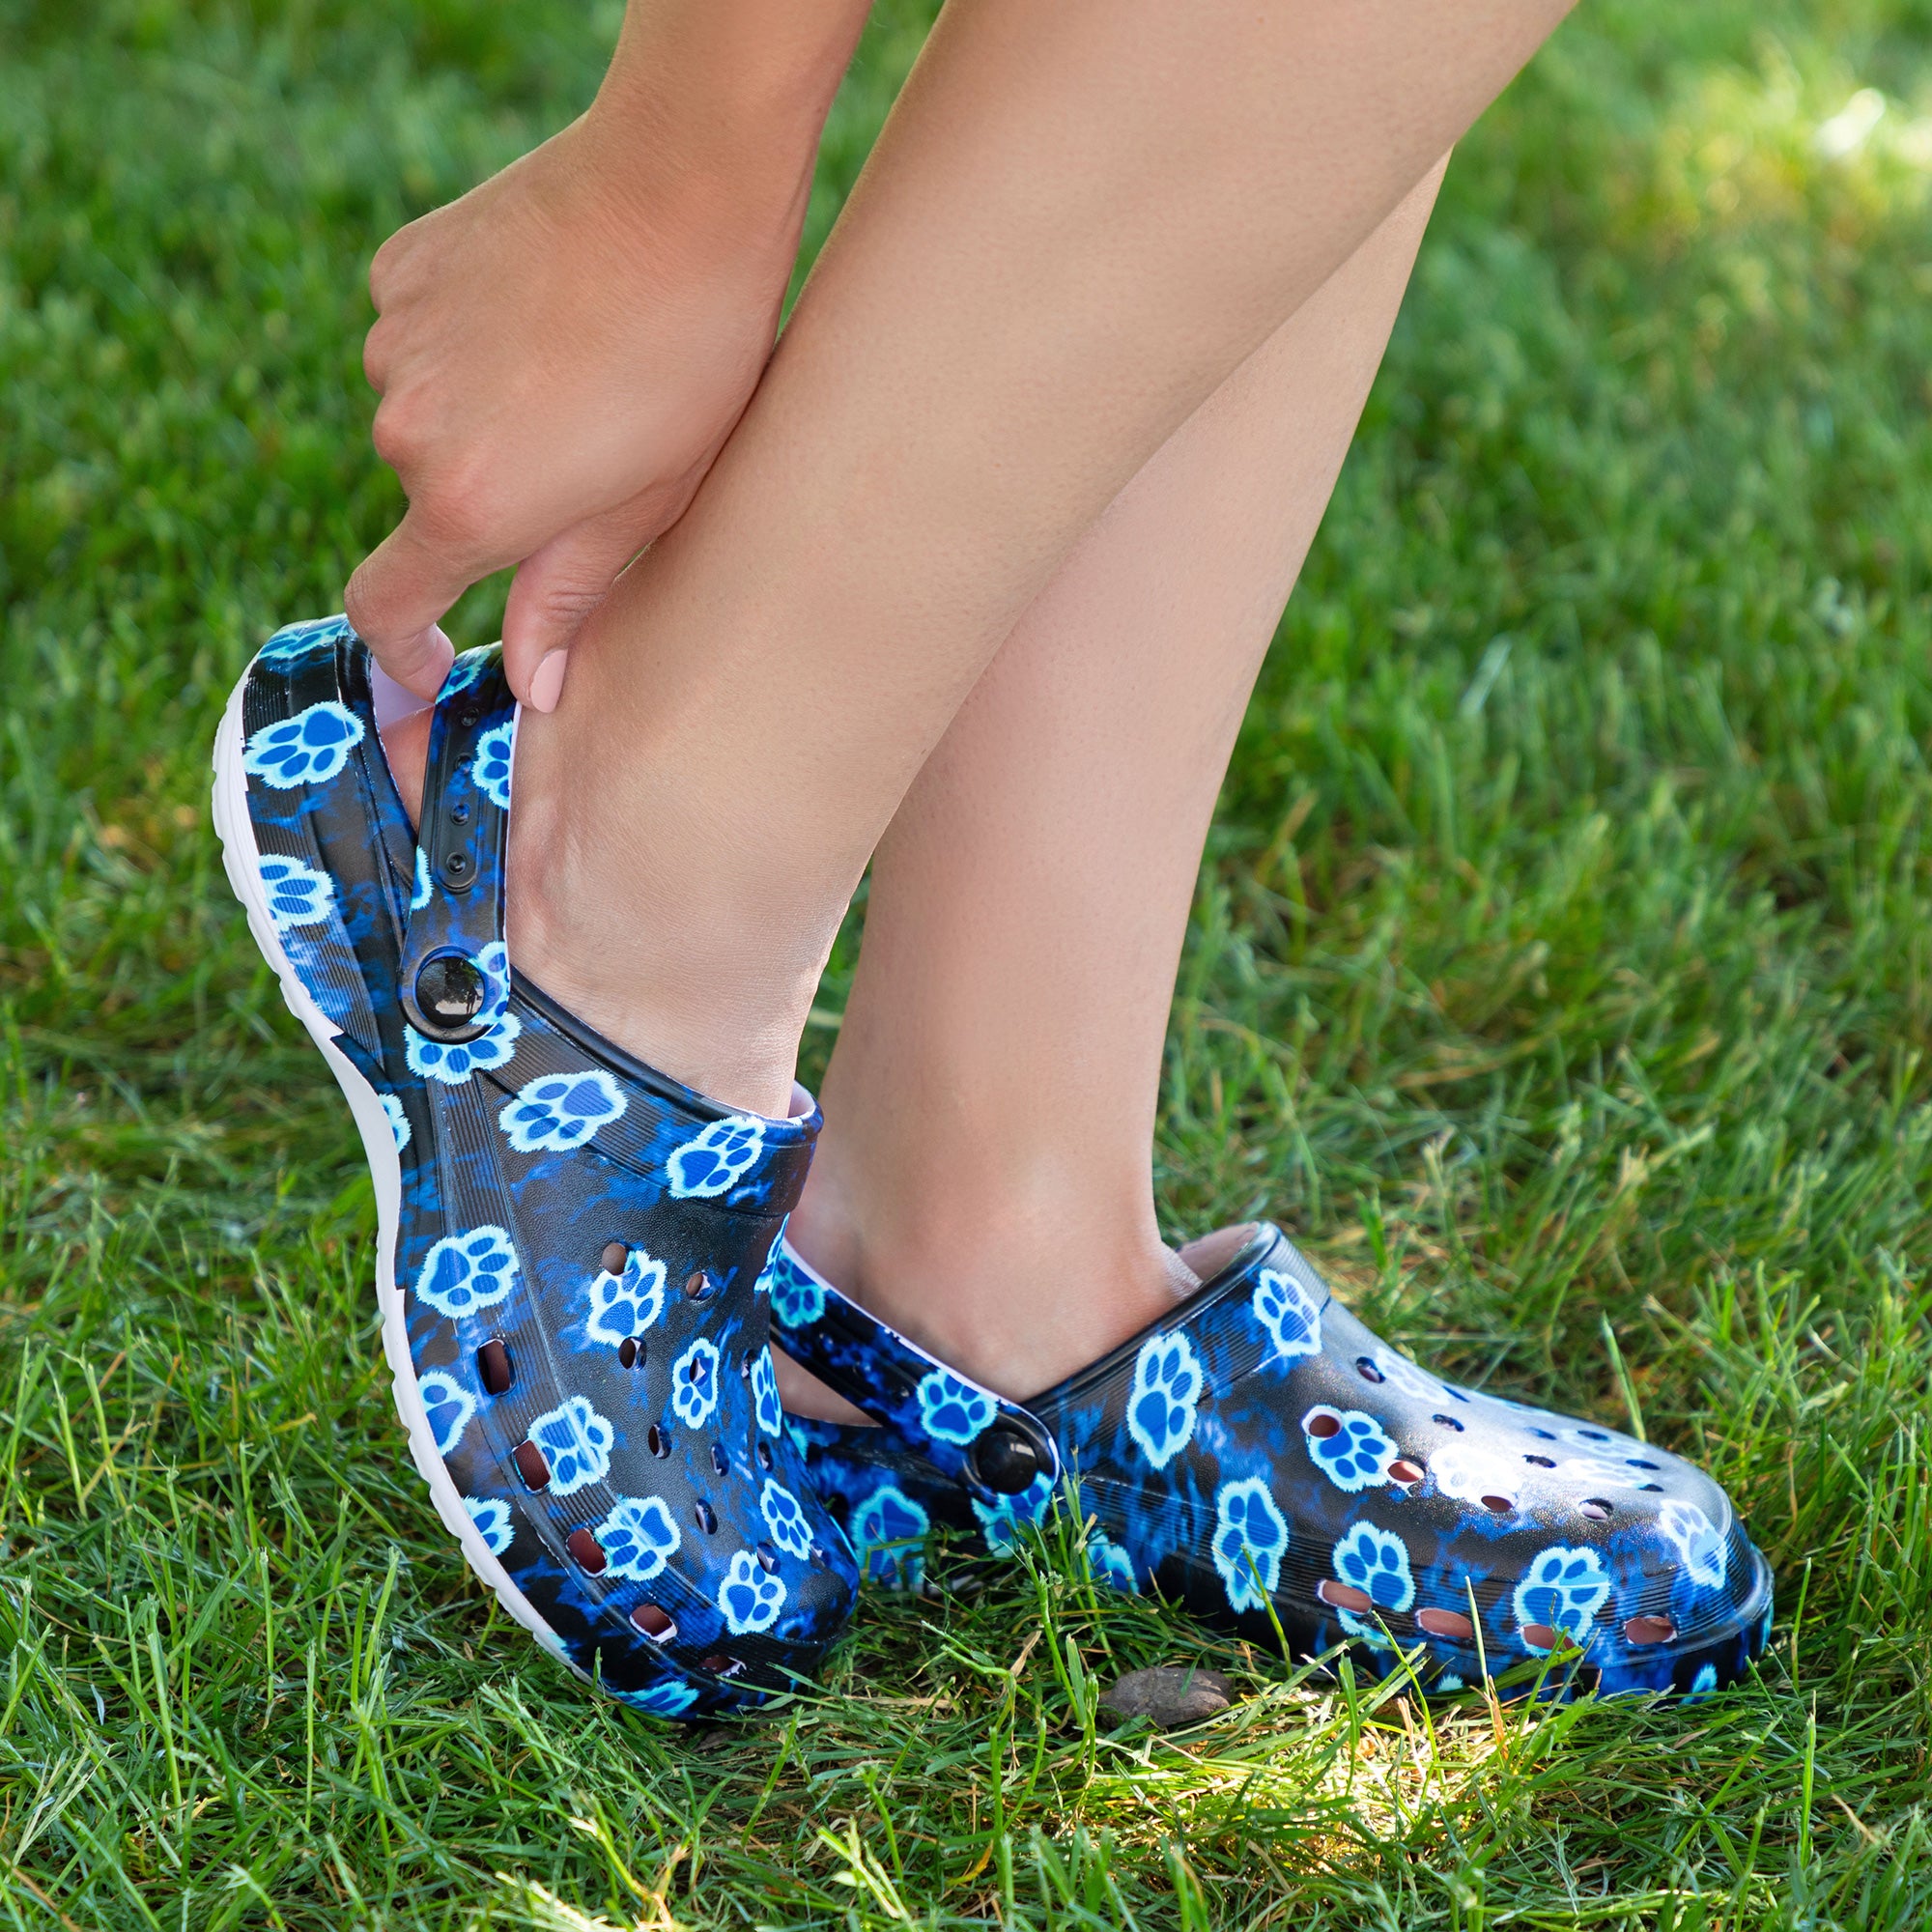 Super Comfy Paw Print Clogs - Glowing Paws - 9